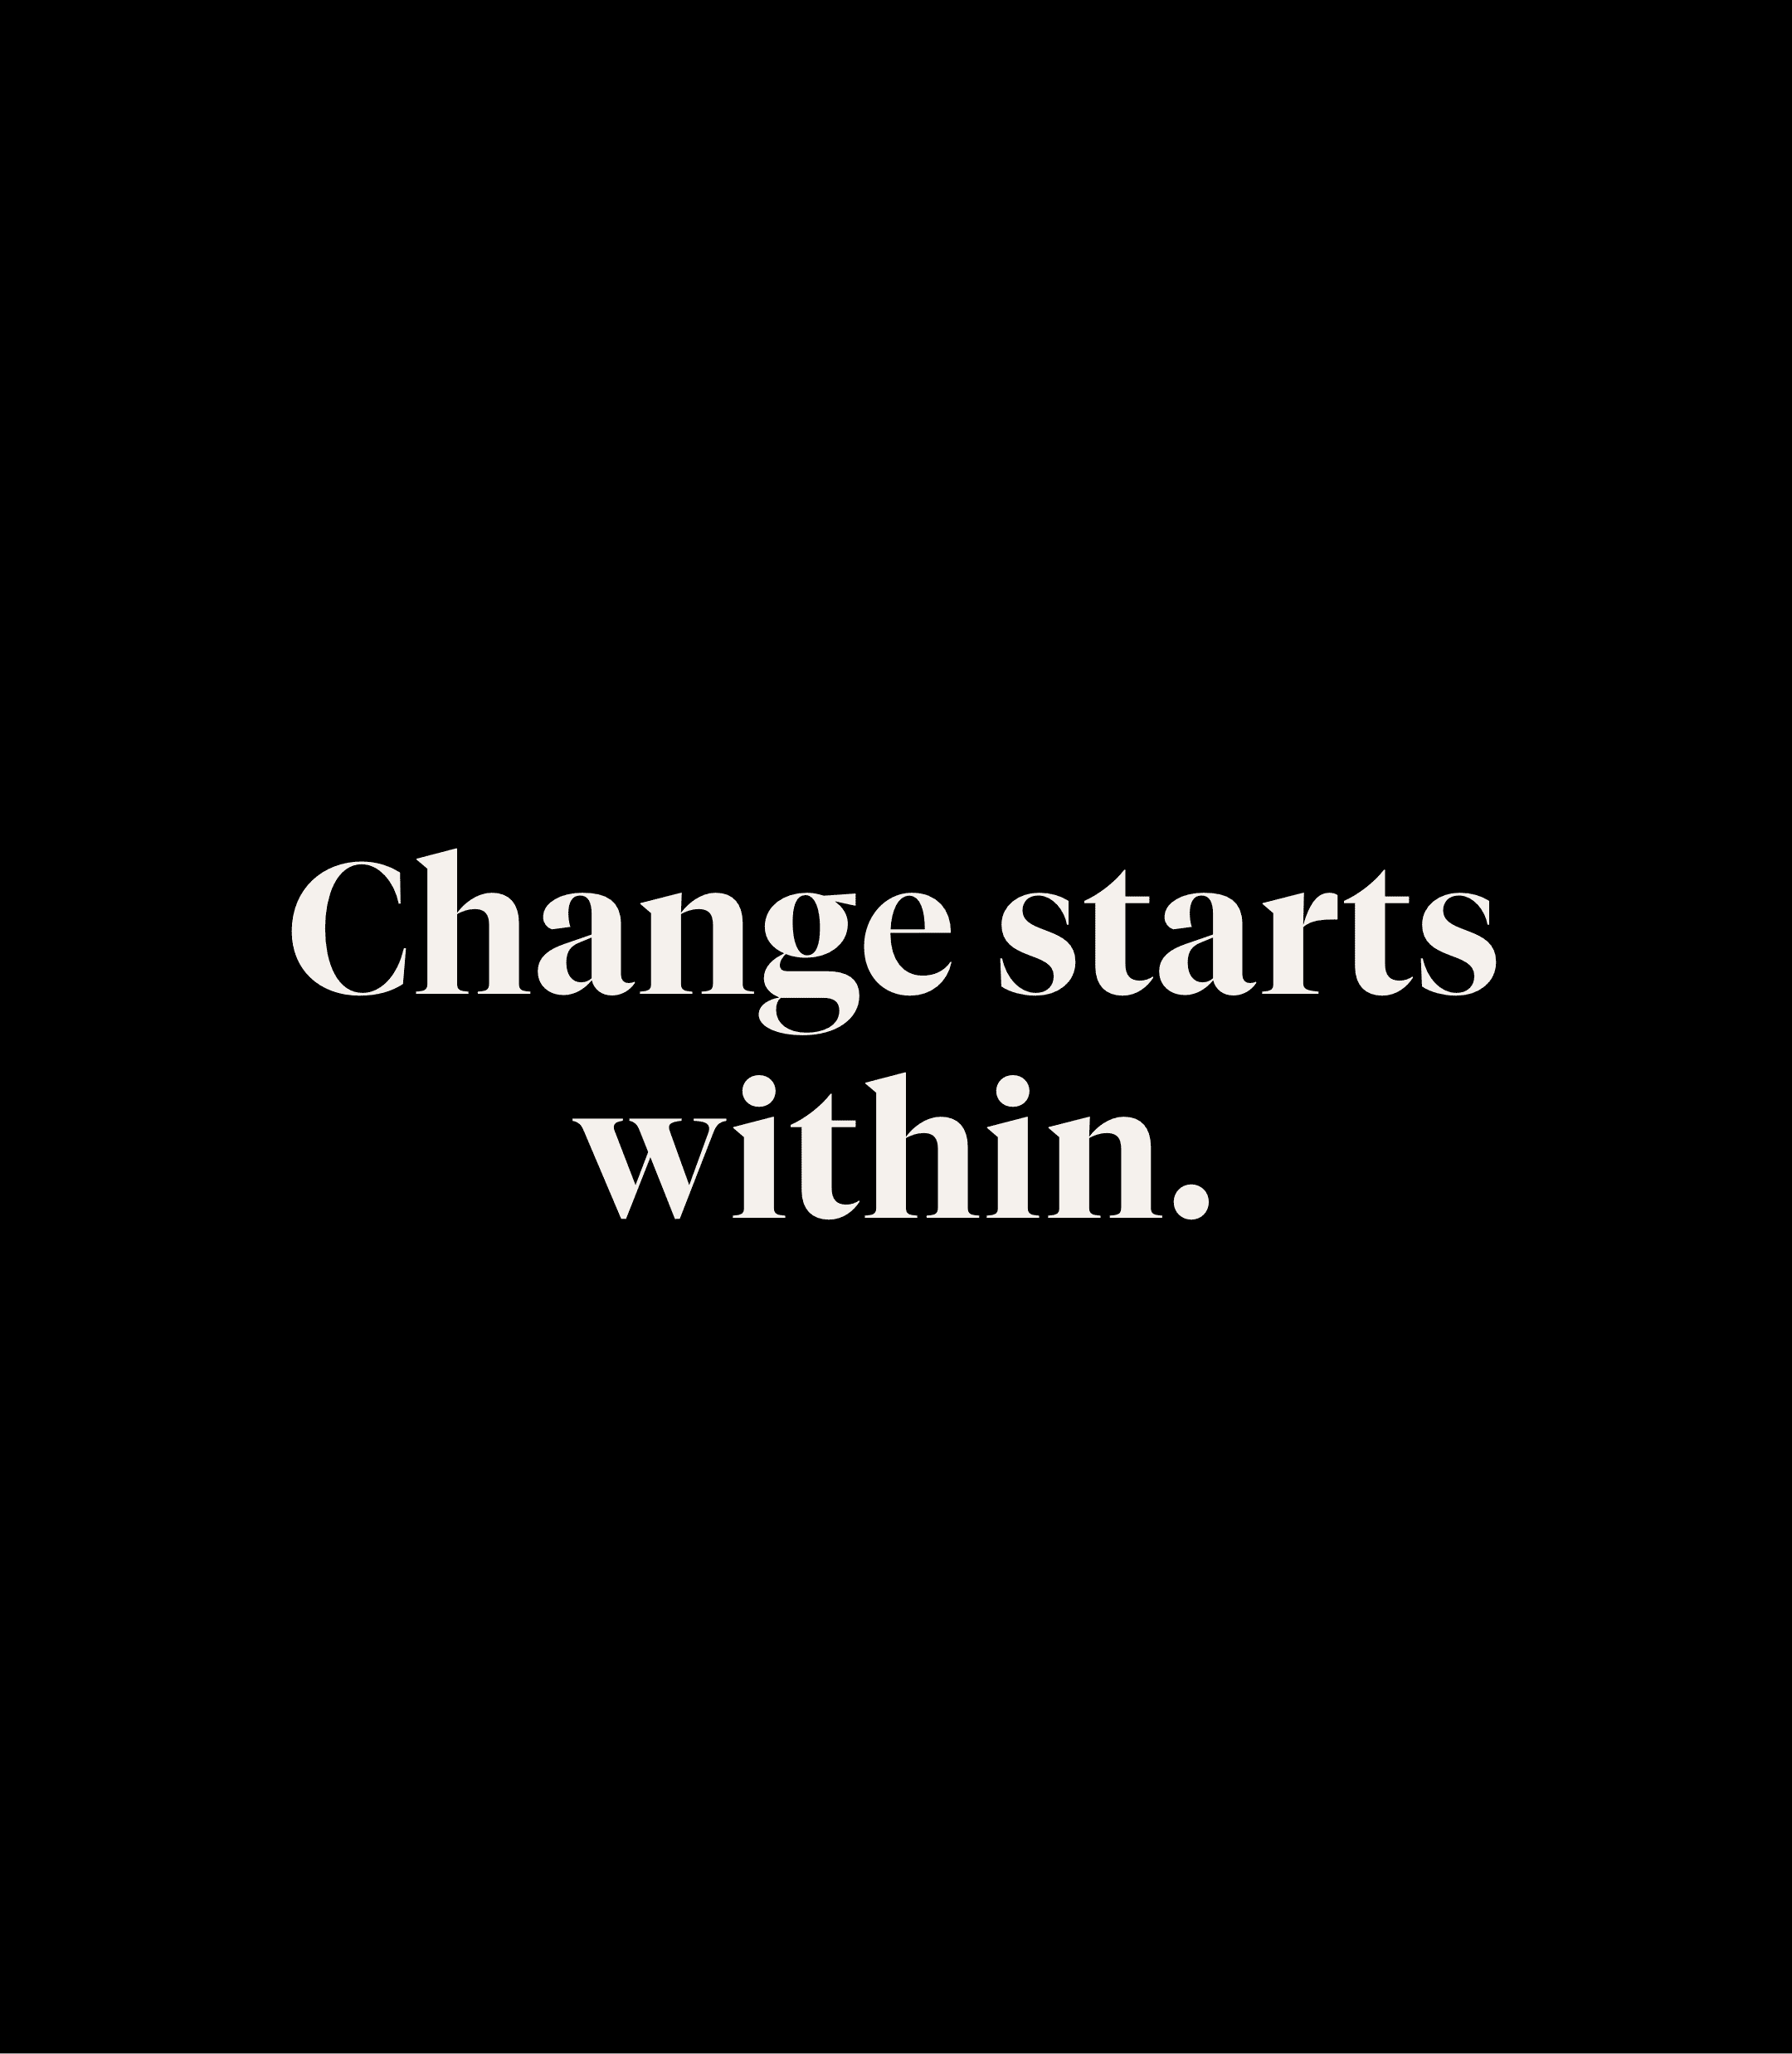 Change starts within. This is our commitment to do better.